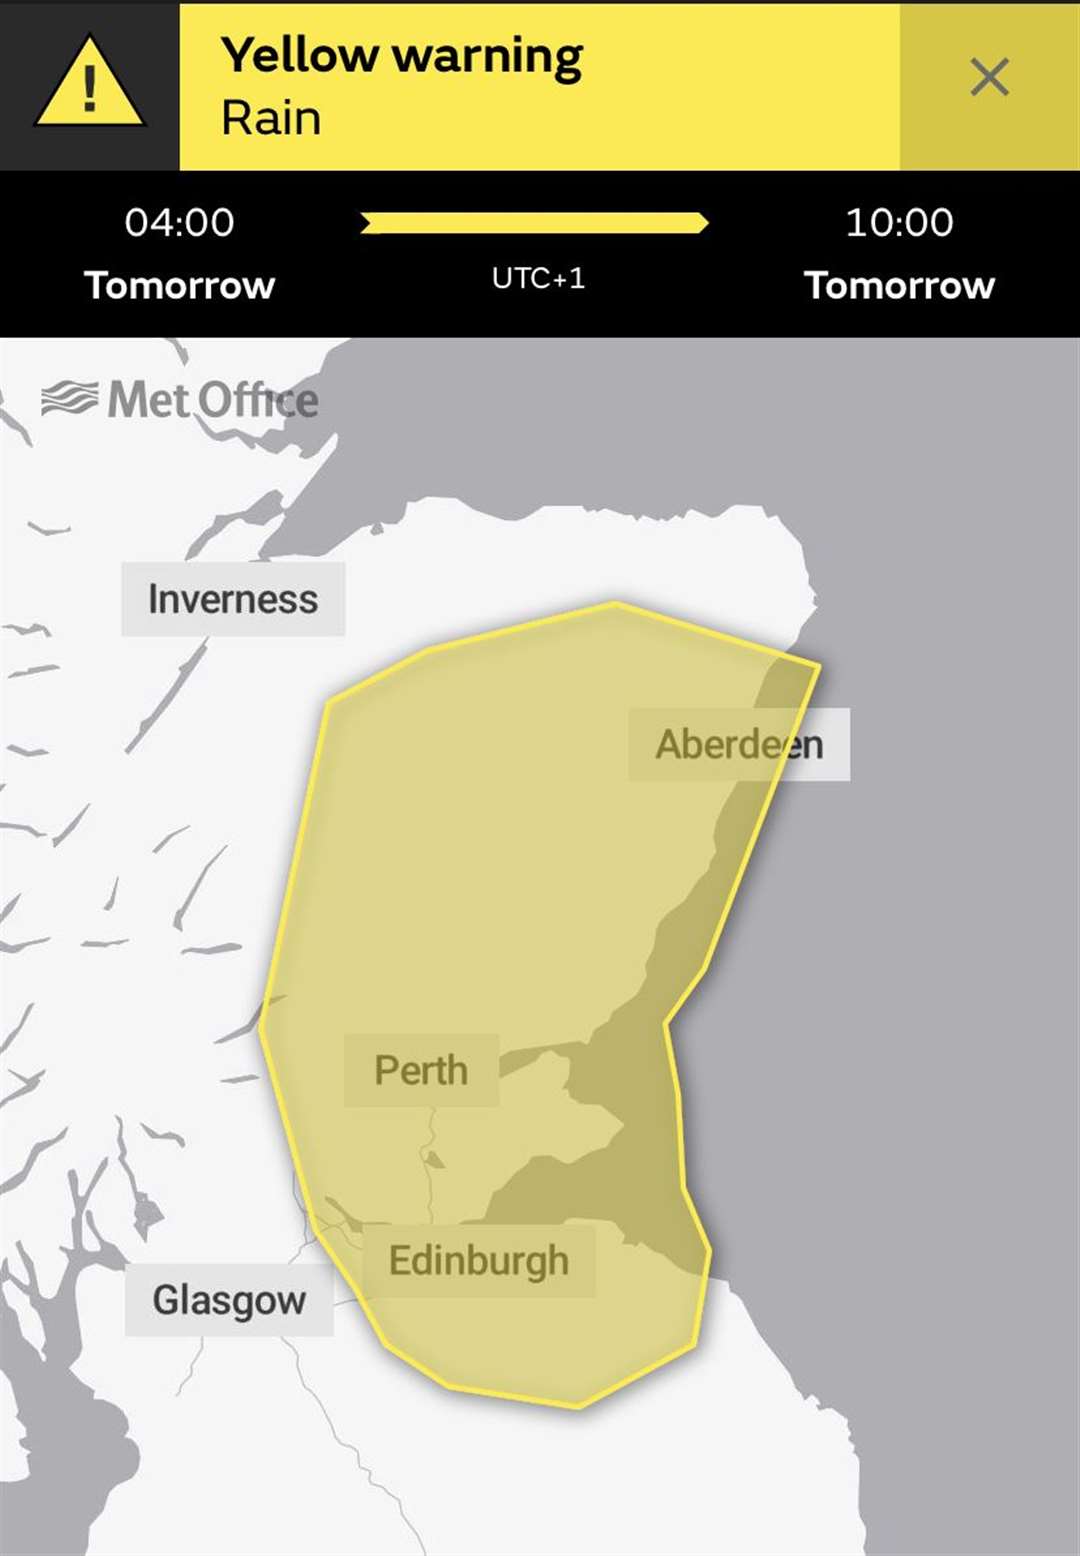 The Met Office has issued a yellow weather warning for heavy rain tomorrow (Thursday).